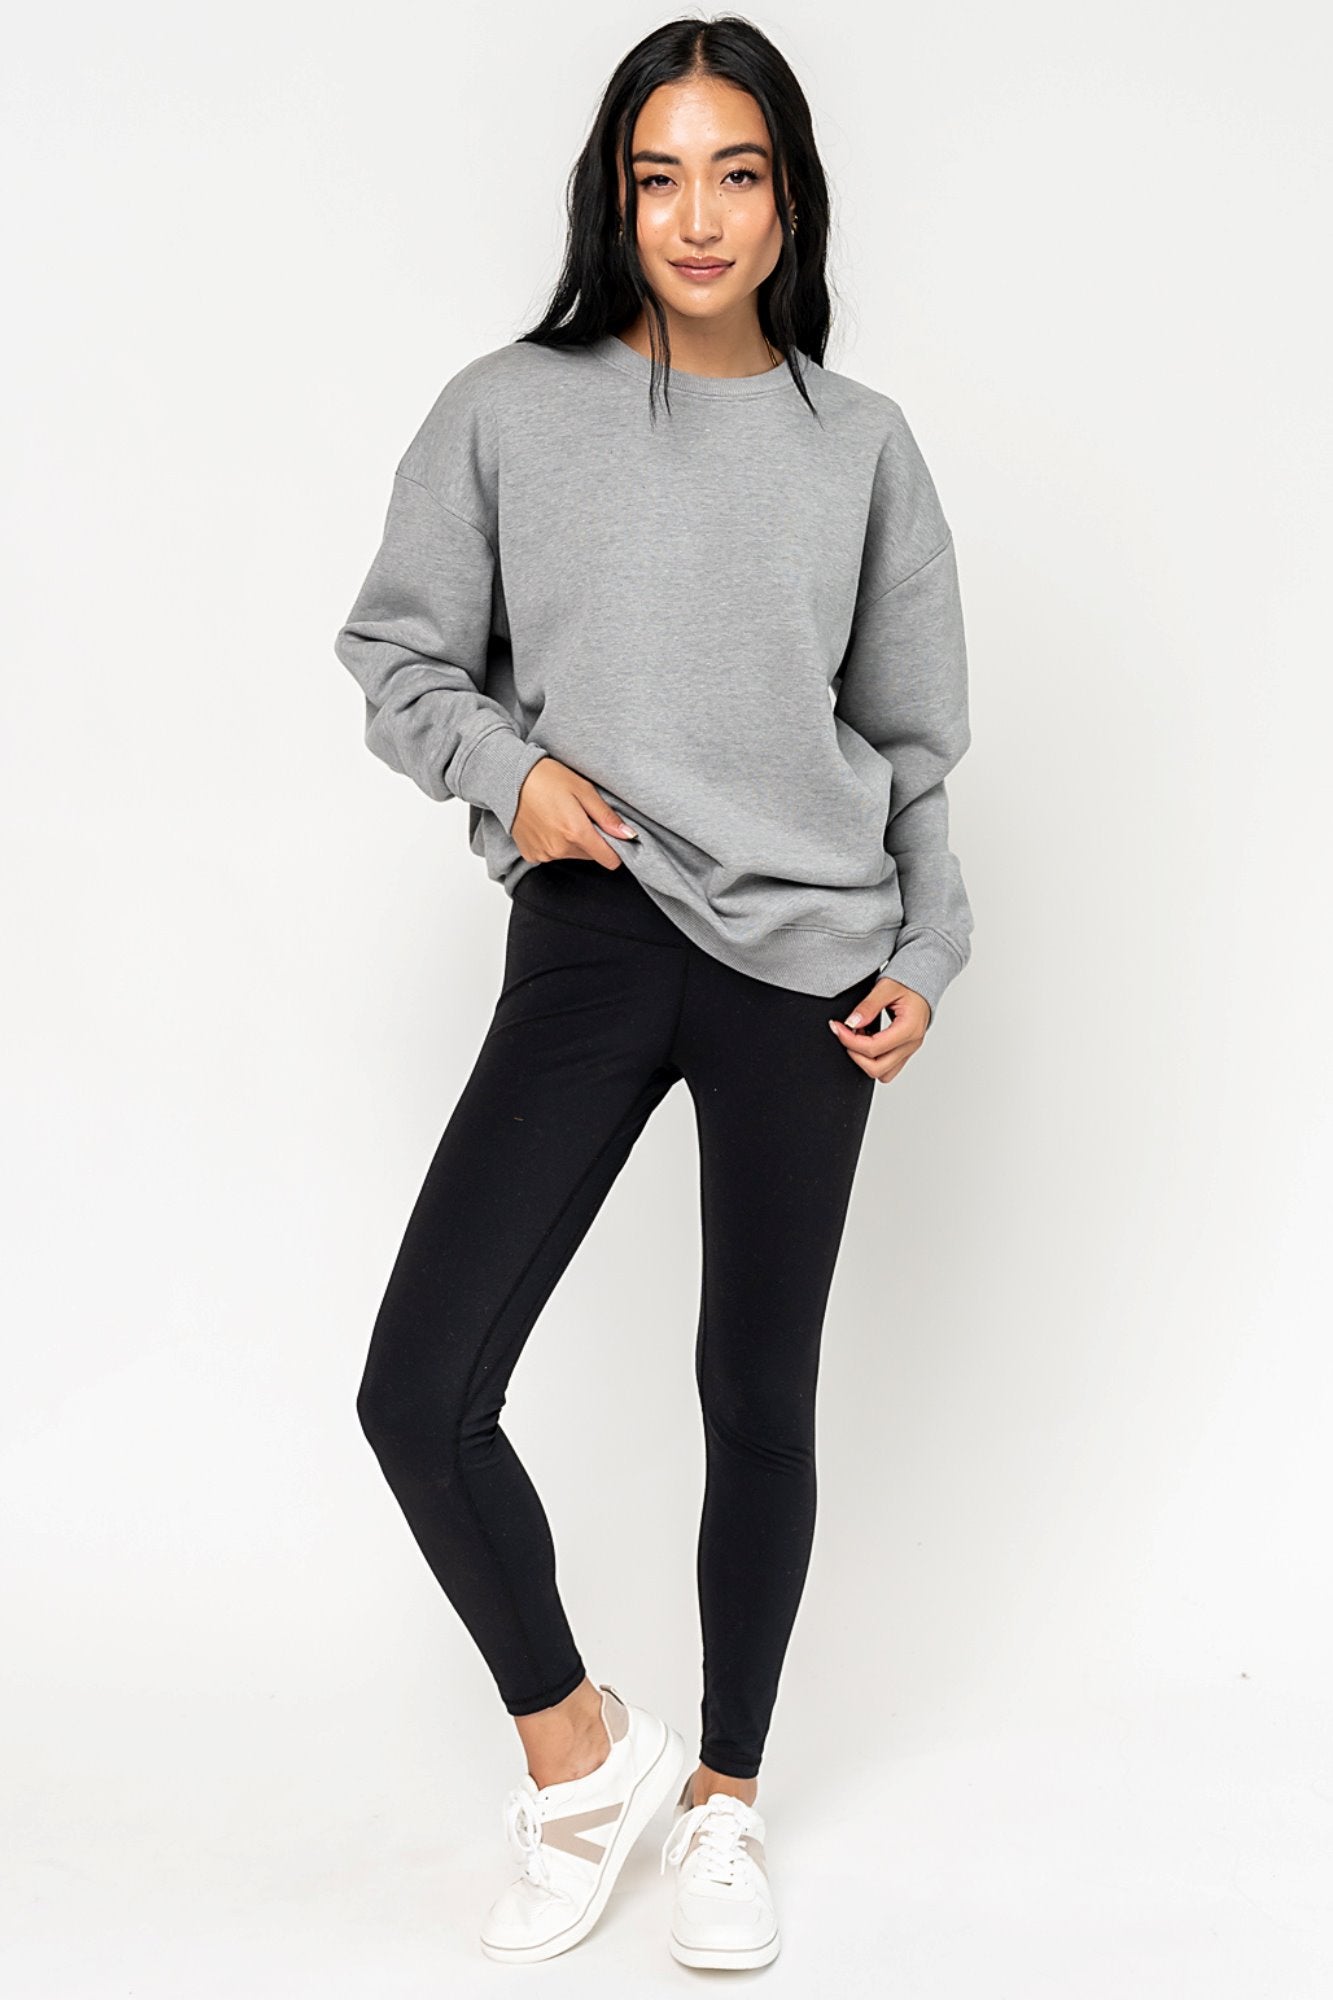 Blake Pullover in Heather Grey Holley Girl 